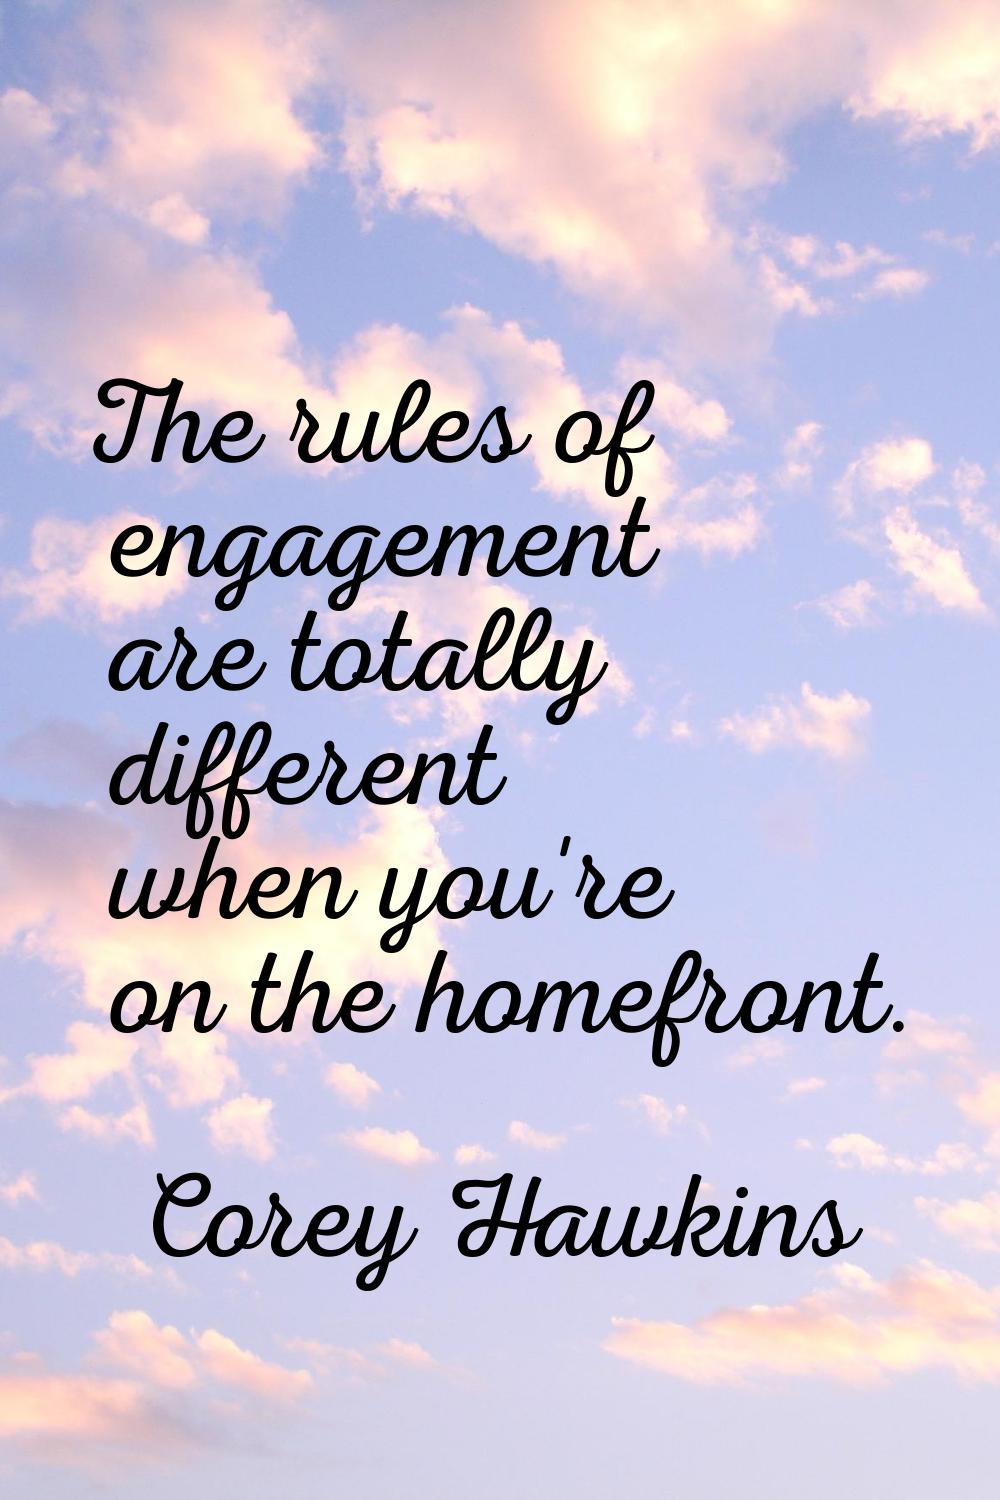 The rules of engagement are totally different when you're on the homefront.